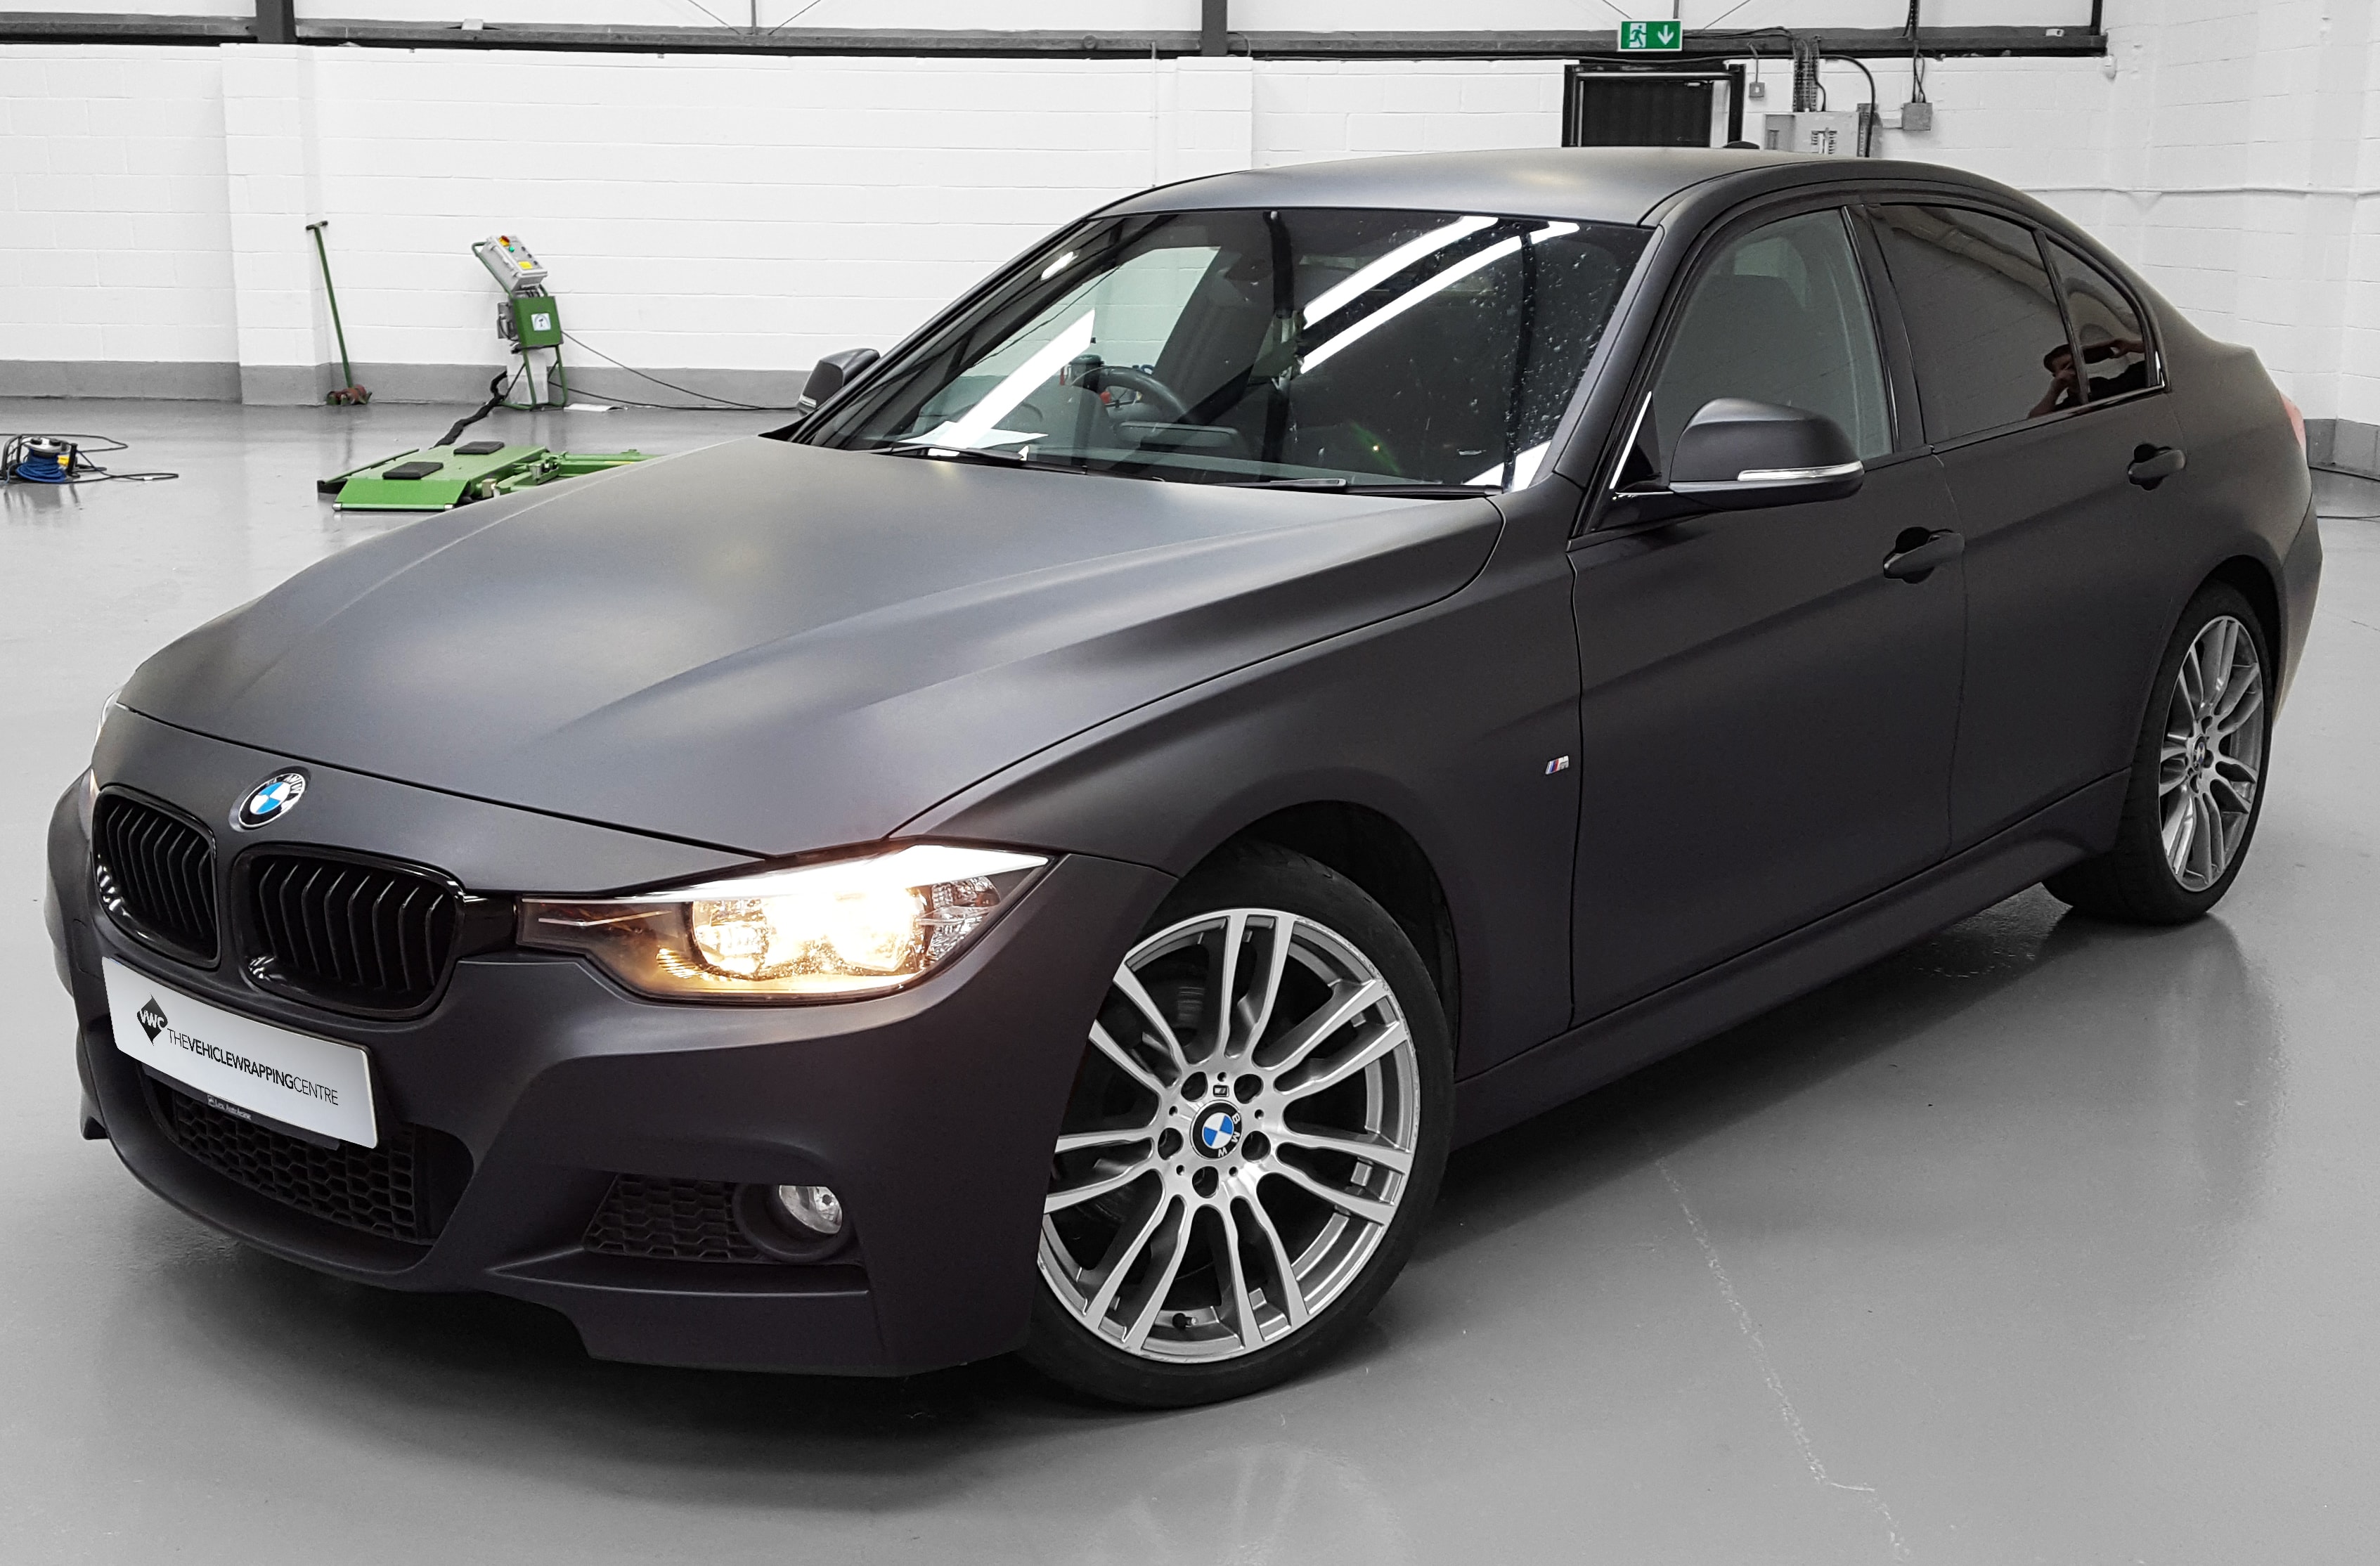 Bmw 3 Series Blacked Out - BMW 3 Series 2019